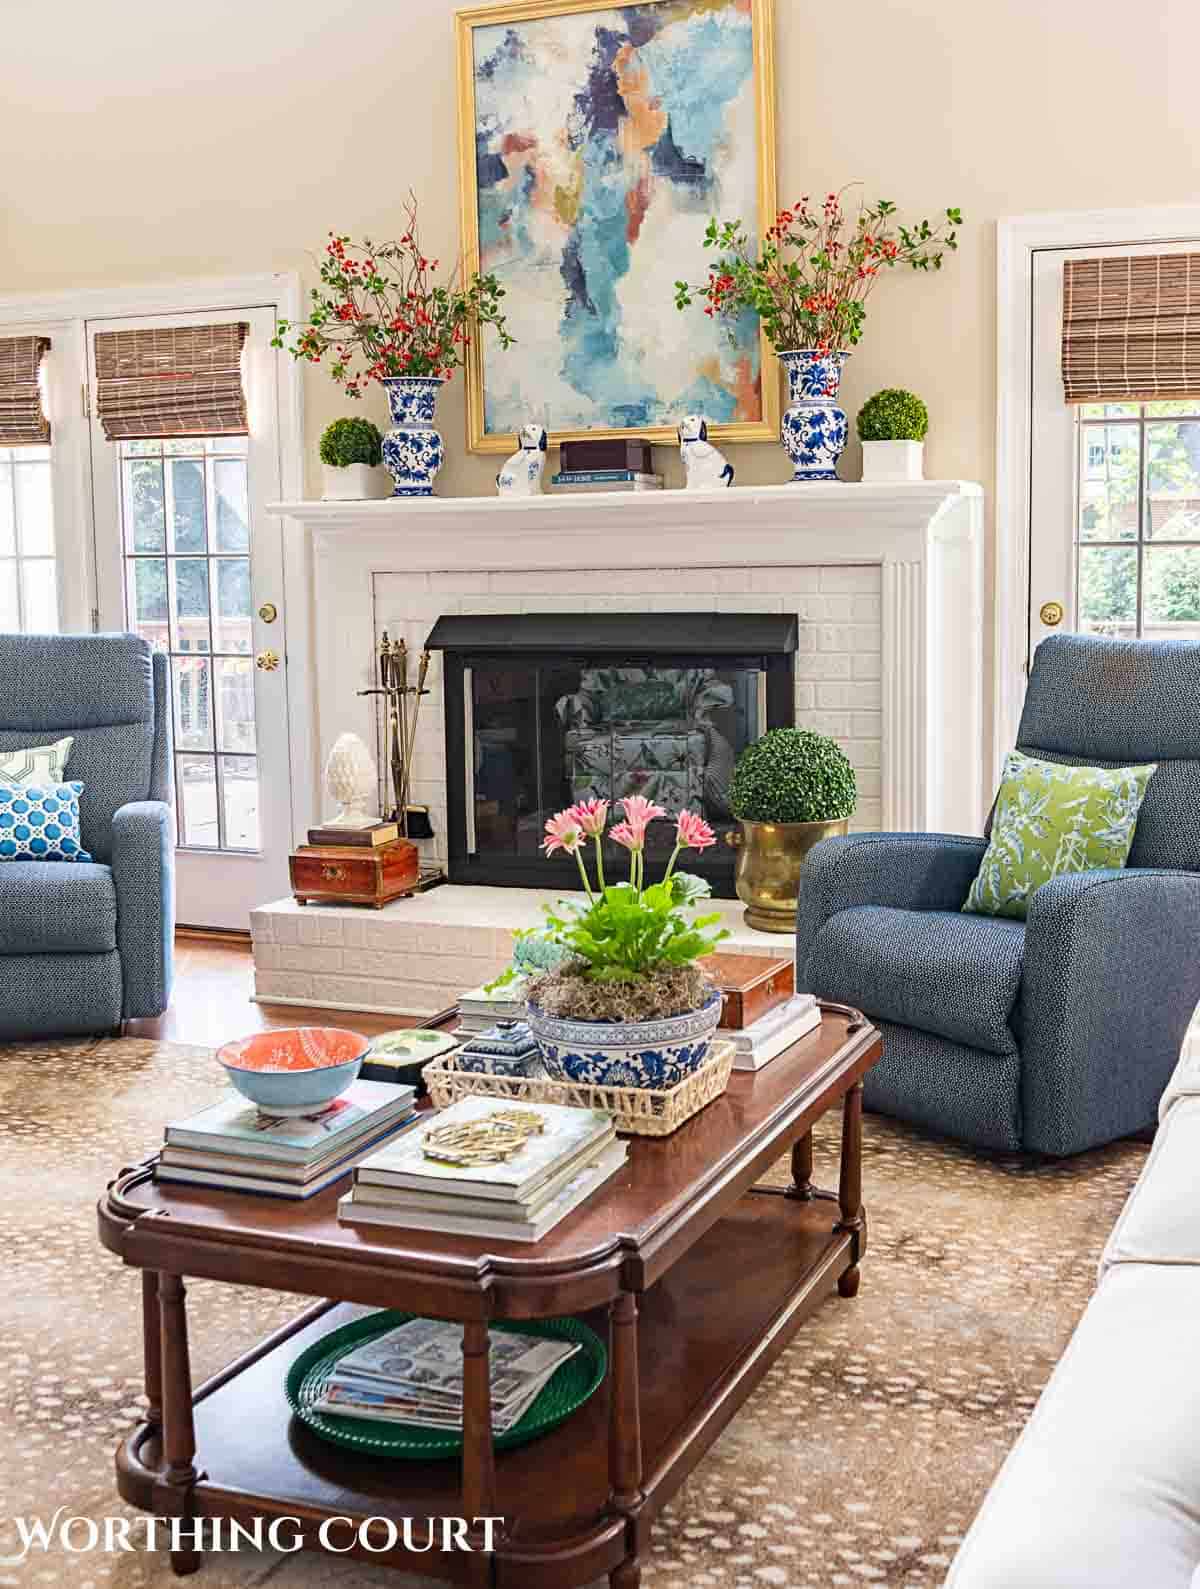 Spring Decor: Using Accessories to Add Color to a Neutral Home